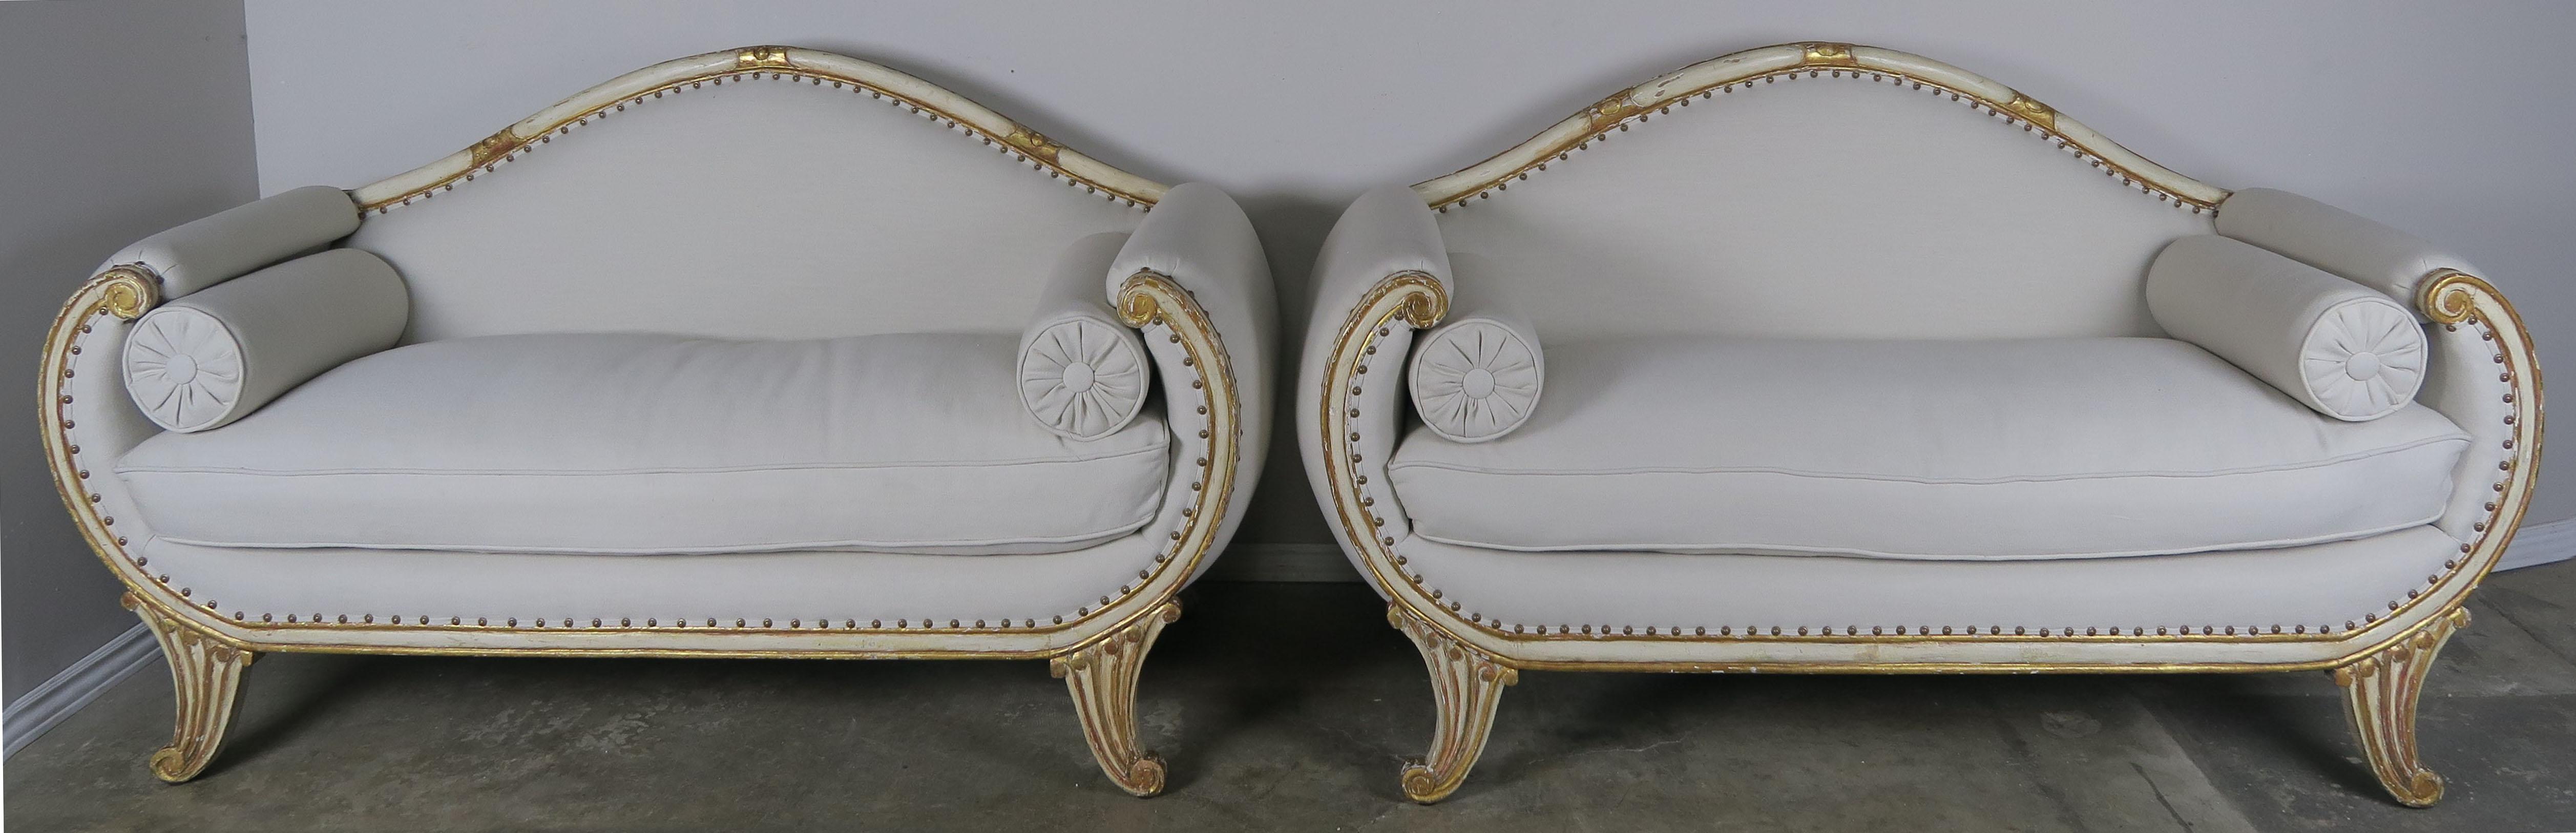 Pair of matching Italian cream painted and parcel 22-karat gold leaf settees with rolled arms and carved feet. The settees are newly upholstered in a Pindler & Pindler 100% linen textile with original nailhead trim detail. Loose down filled